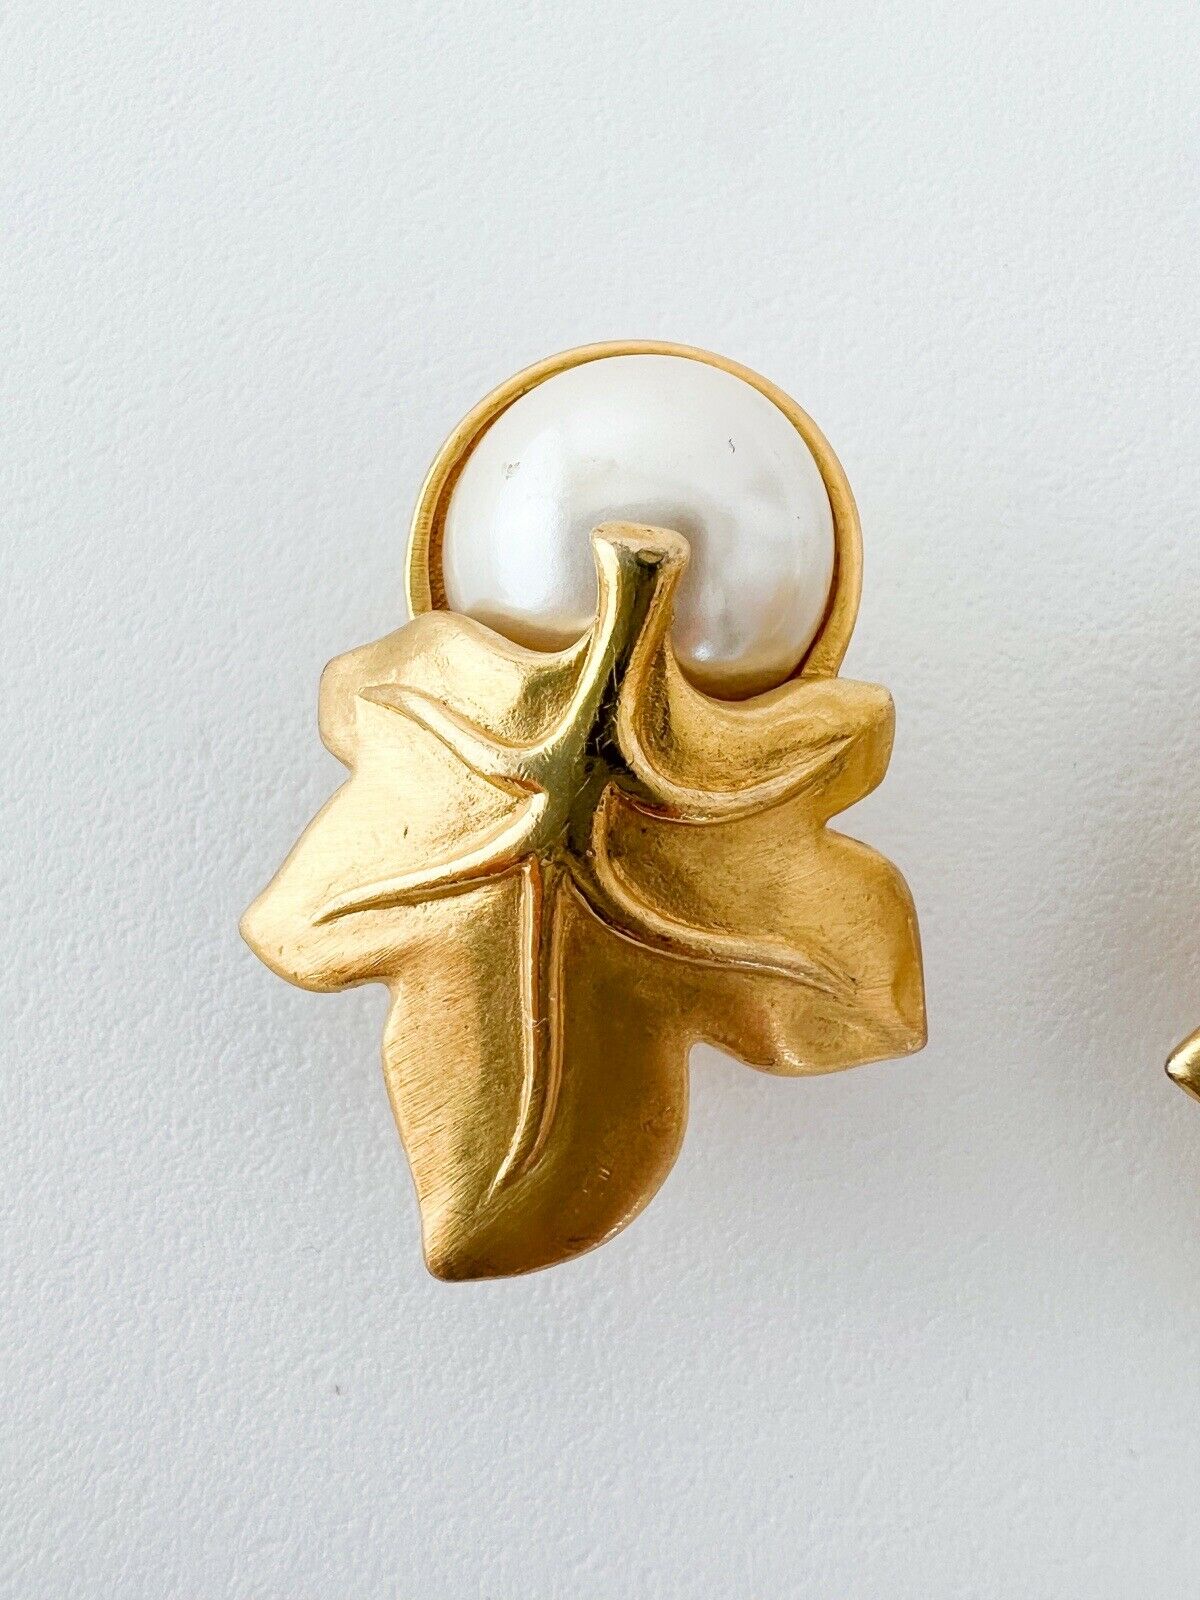 Givenchy Vintage Earrings Pearl Gold